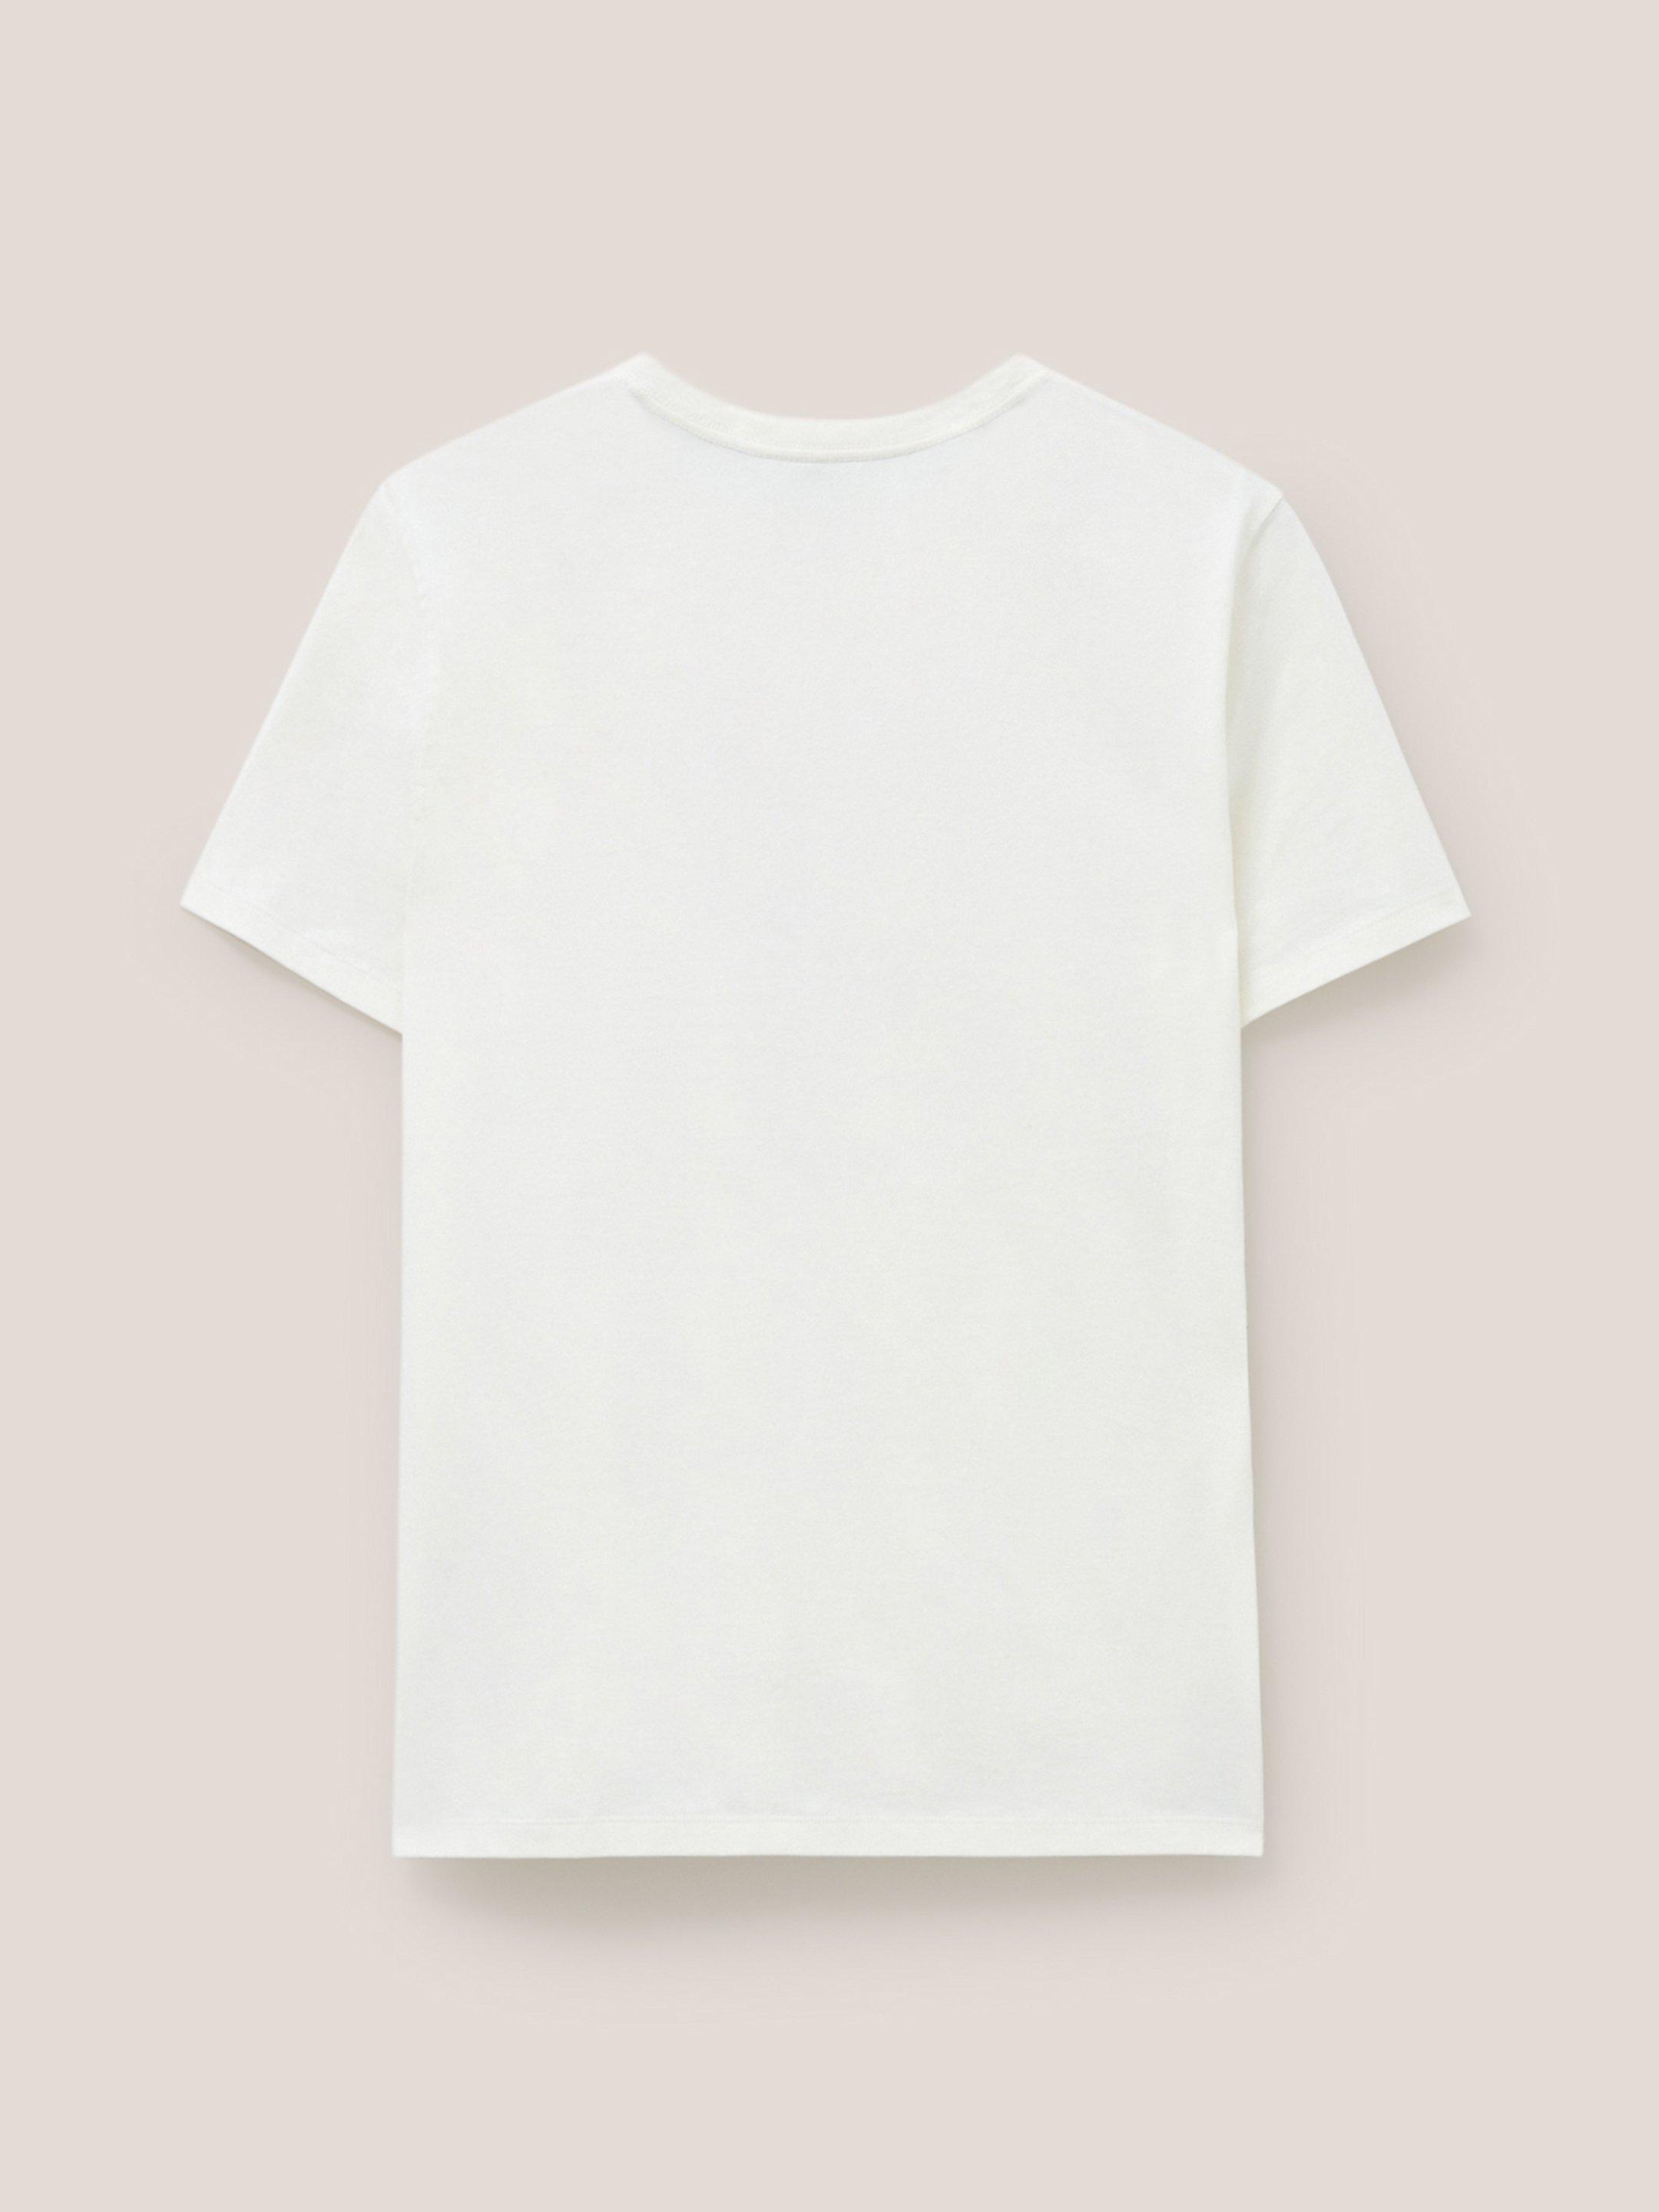 Chairman Graphic Tee in NAT WHITE - FLAT BACK